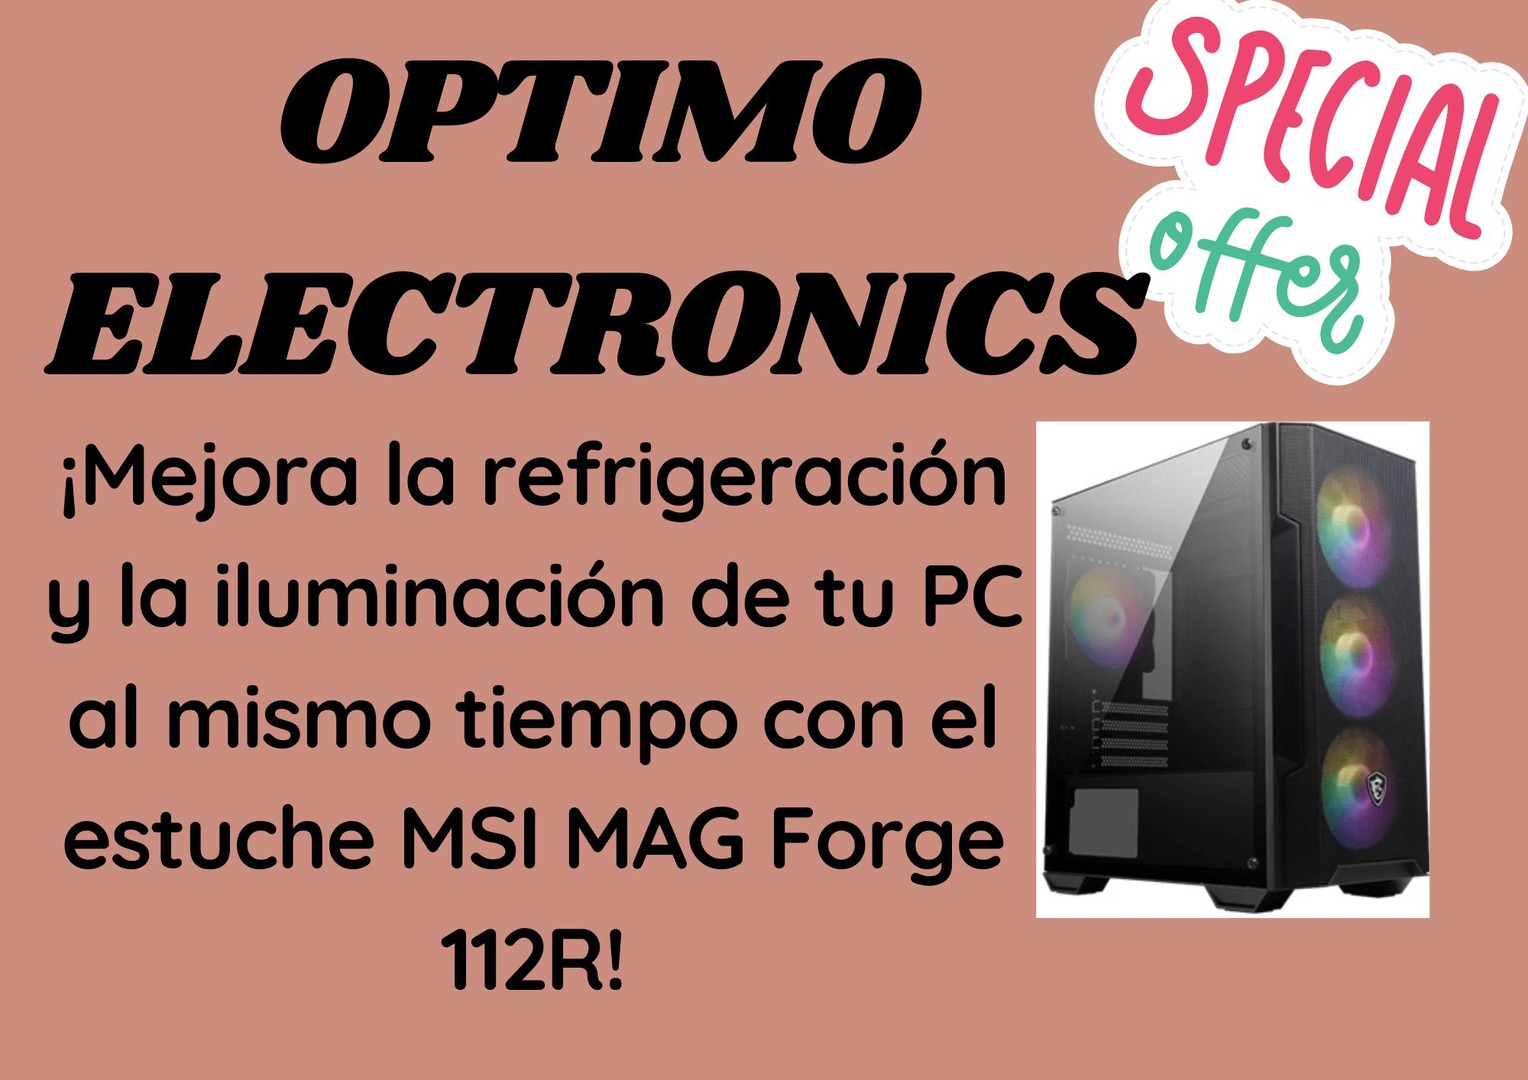 otros electronicos - CASE MSI MAG FORGE 112R MID-TOWER, 0